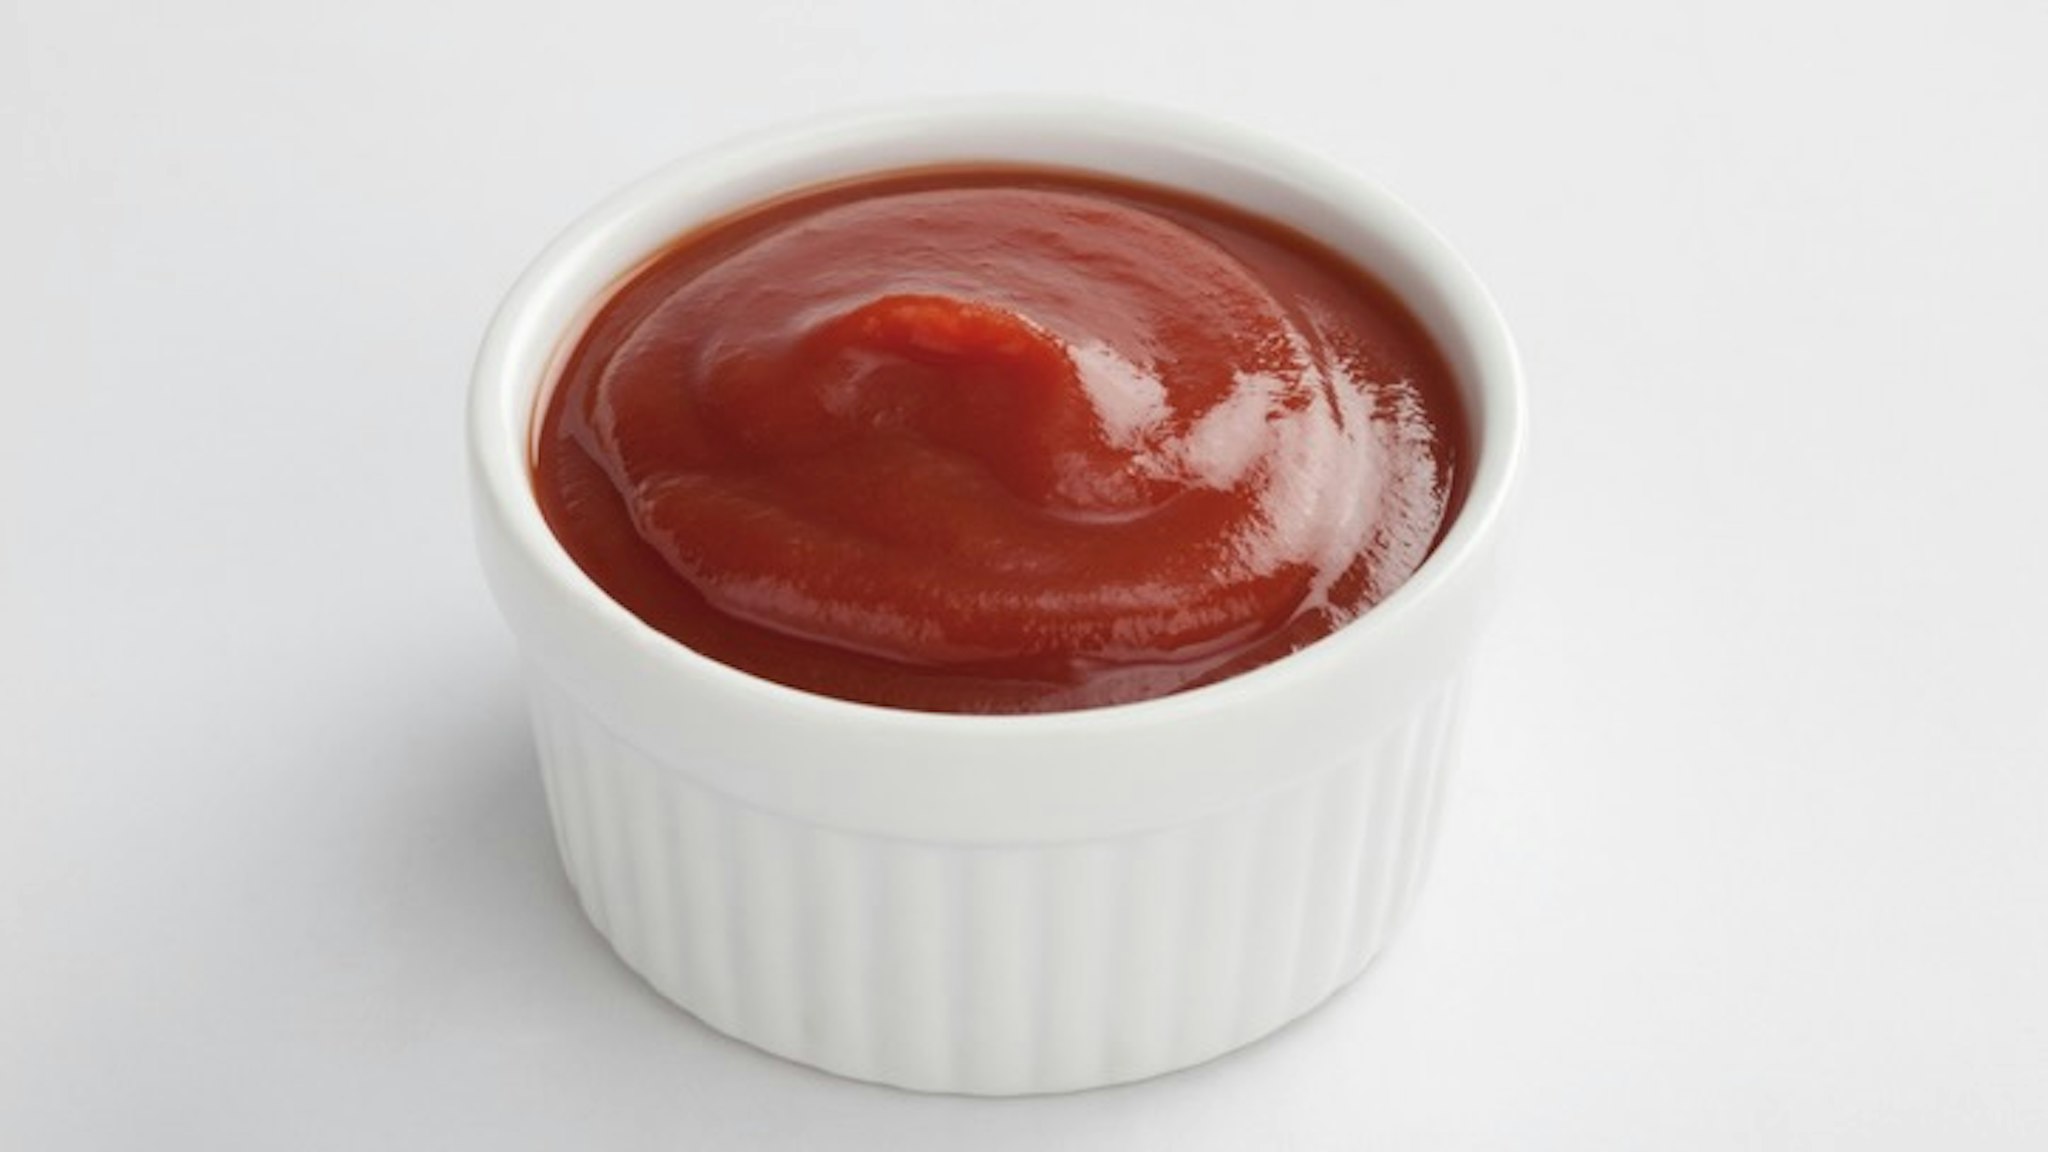 White dip cup filled with ketchup on white background - stock photo Ketchup ramekin.